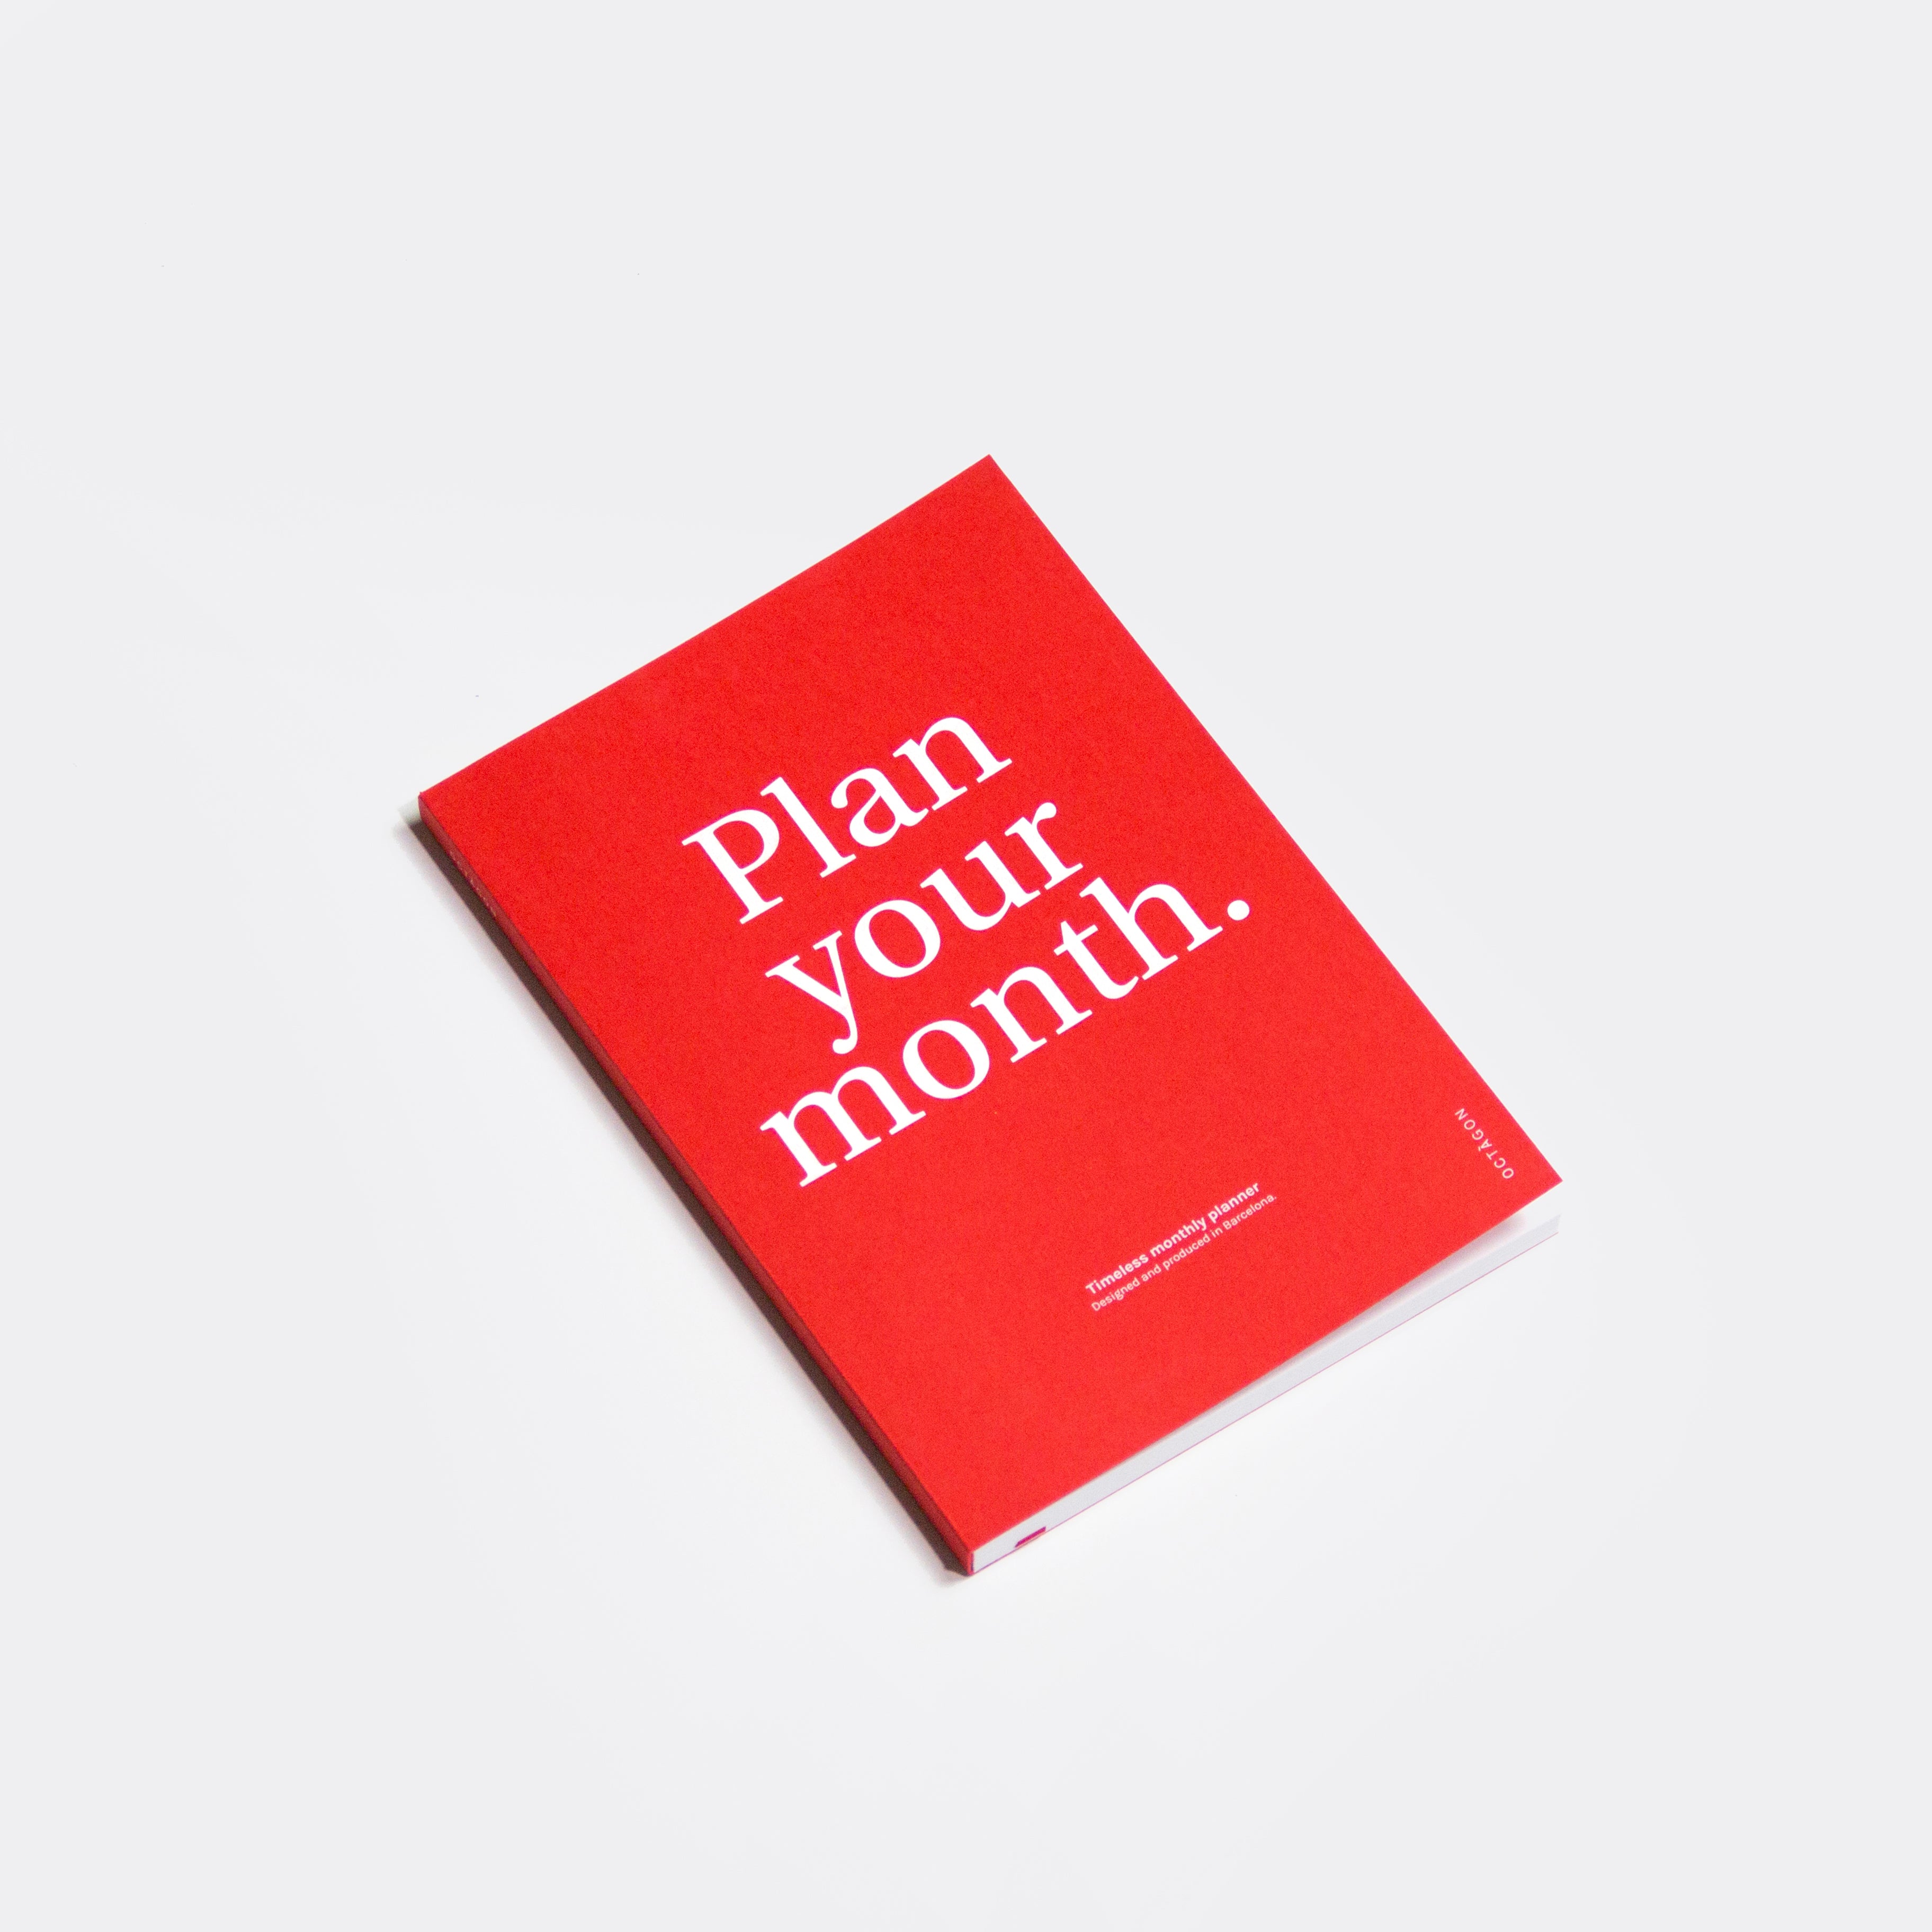 OCTÀGON DESIGN | "Plan Your month" monthly planner | Red color and white typography